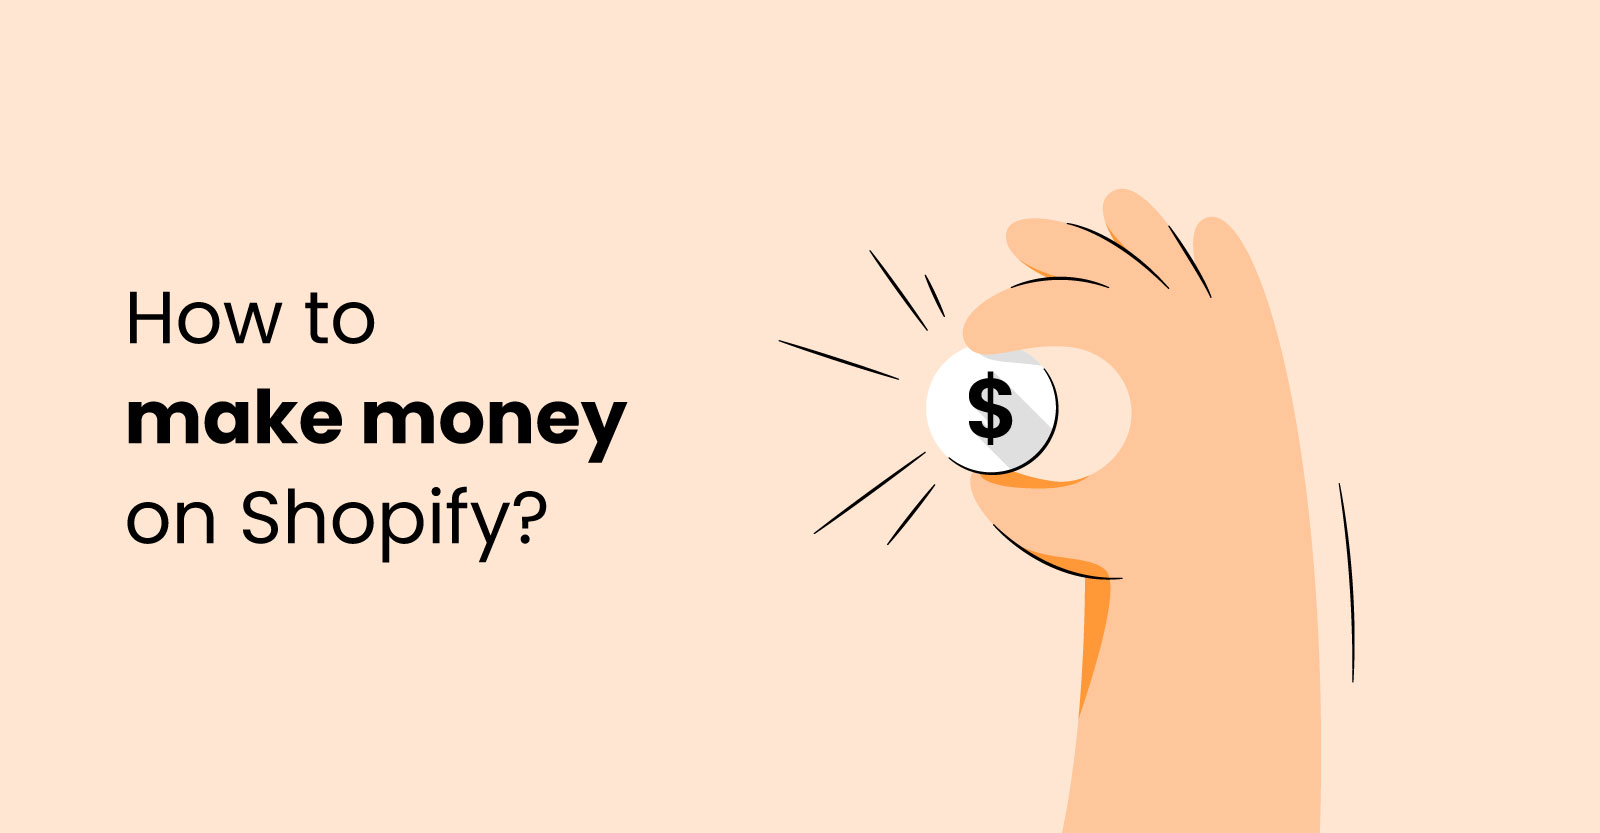 How to Make Money on Shopify in 2022?